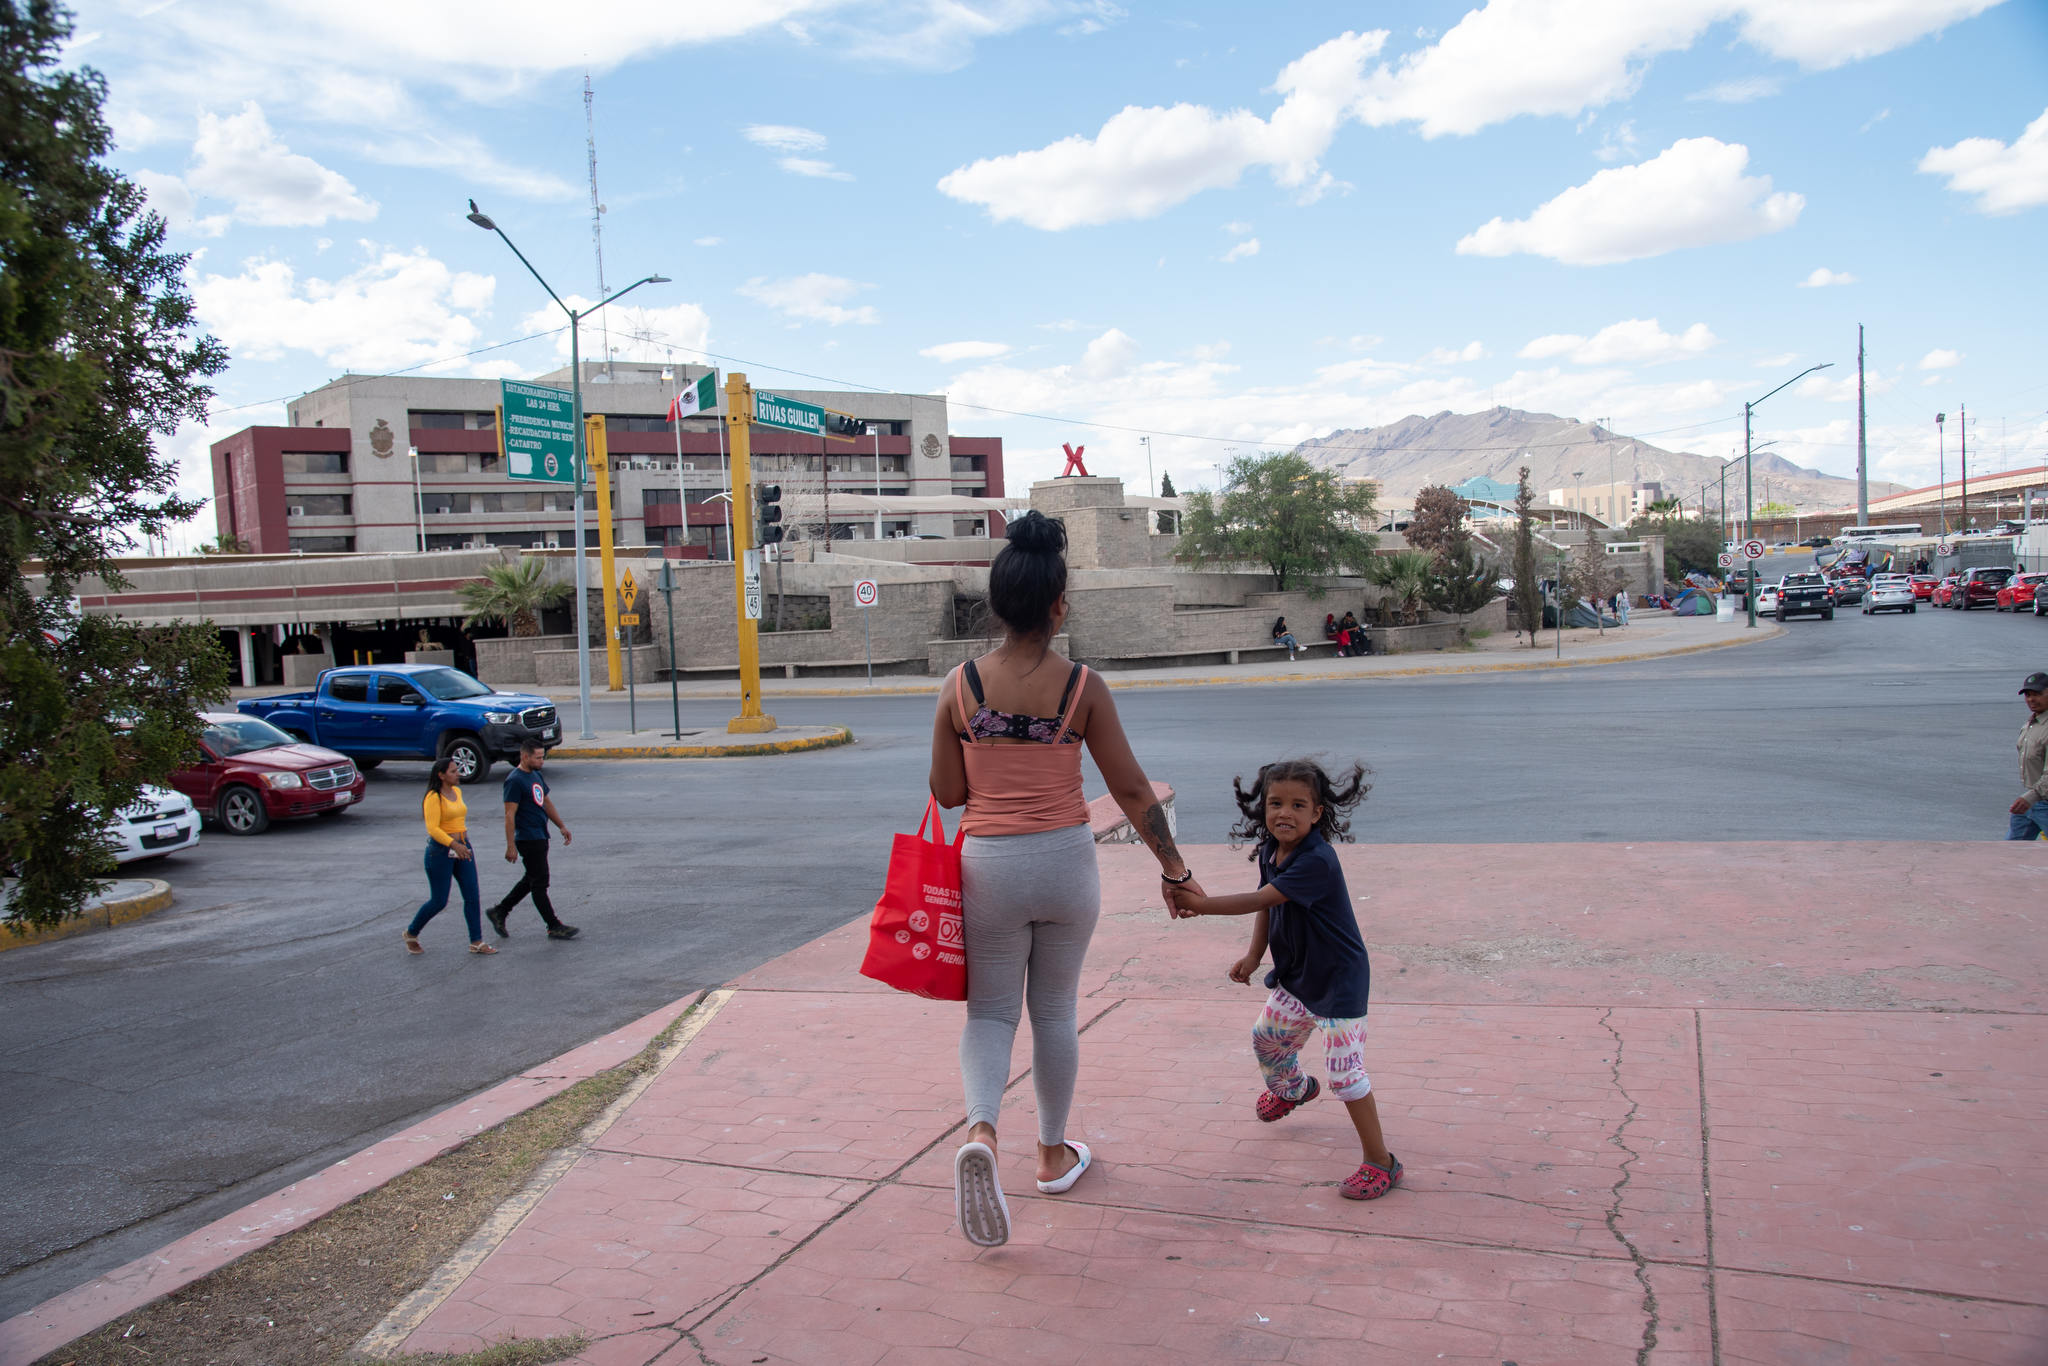 In a Mexican Border Town, Migrants Face a Perilous Existence